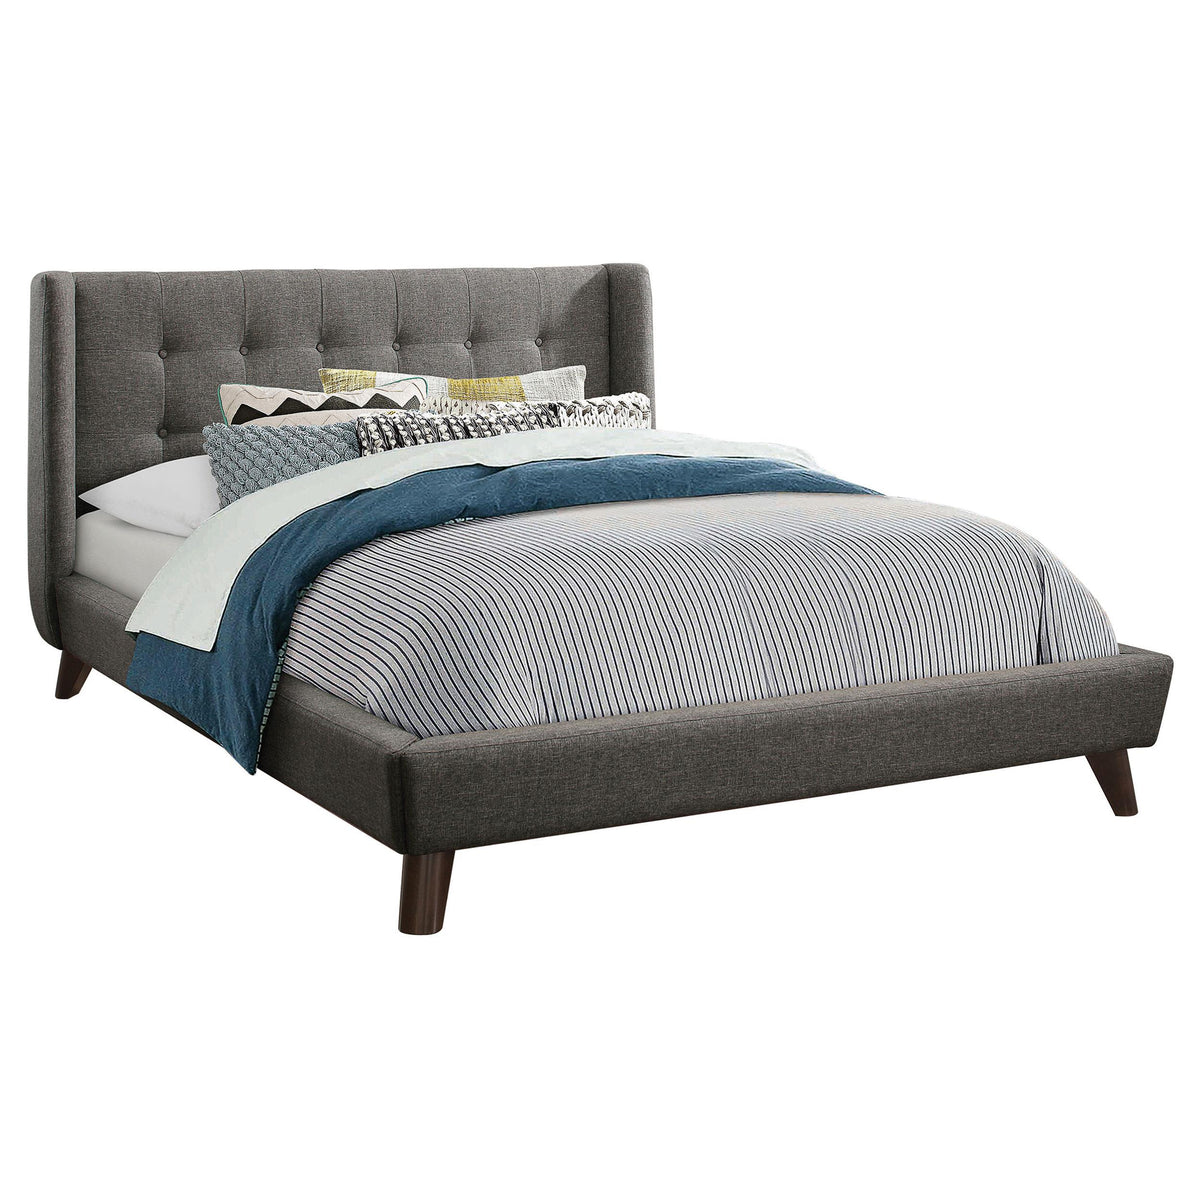 Carrington Button Tufted Full Bed Grey Carrington Button Tufted Full Bed Grey Half Price Furniture